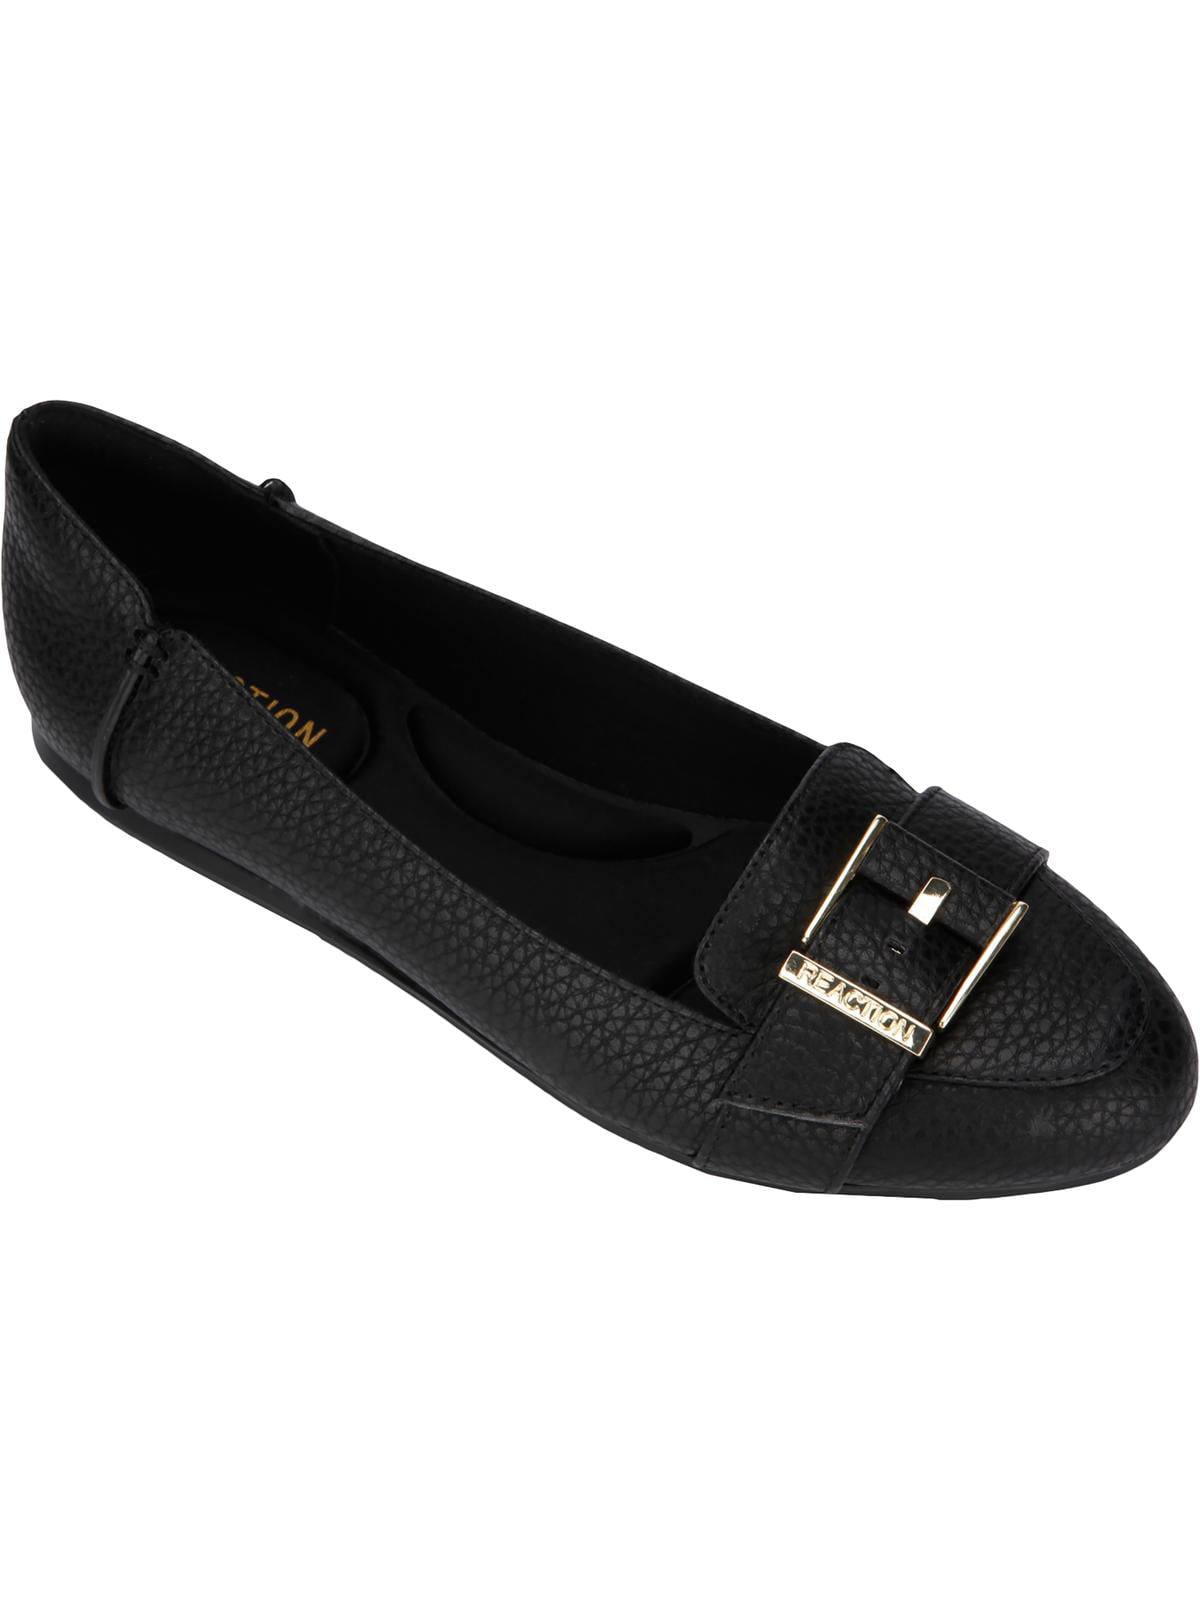 Kenneth Cole New York Womens Wade Ballet Flat with Strap Detail Velvet